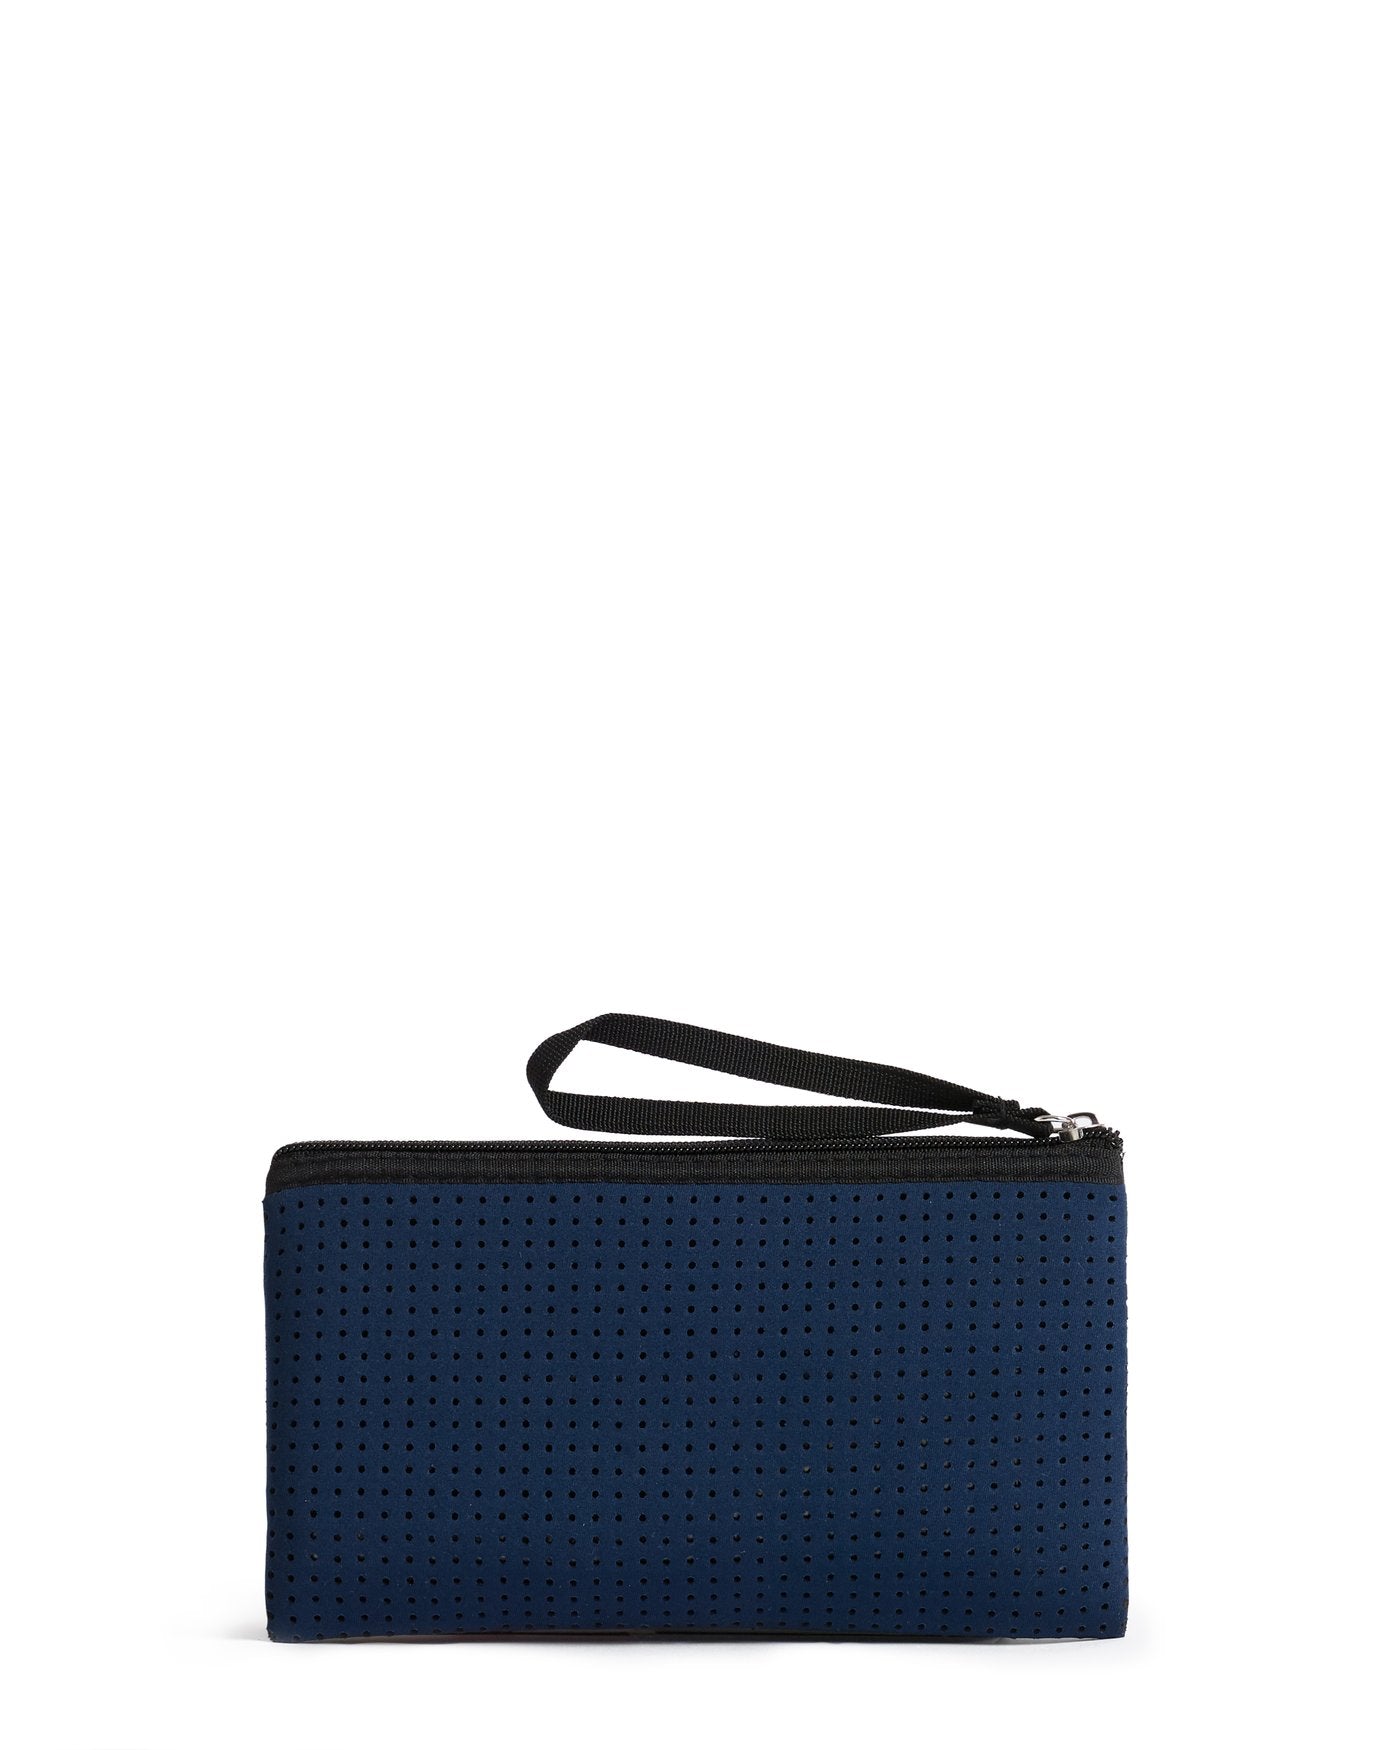 Classic Tote Purse (NAVY BLUE)